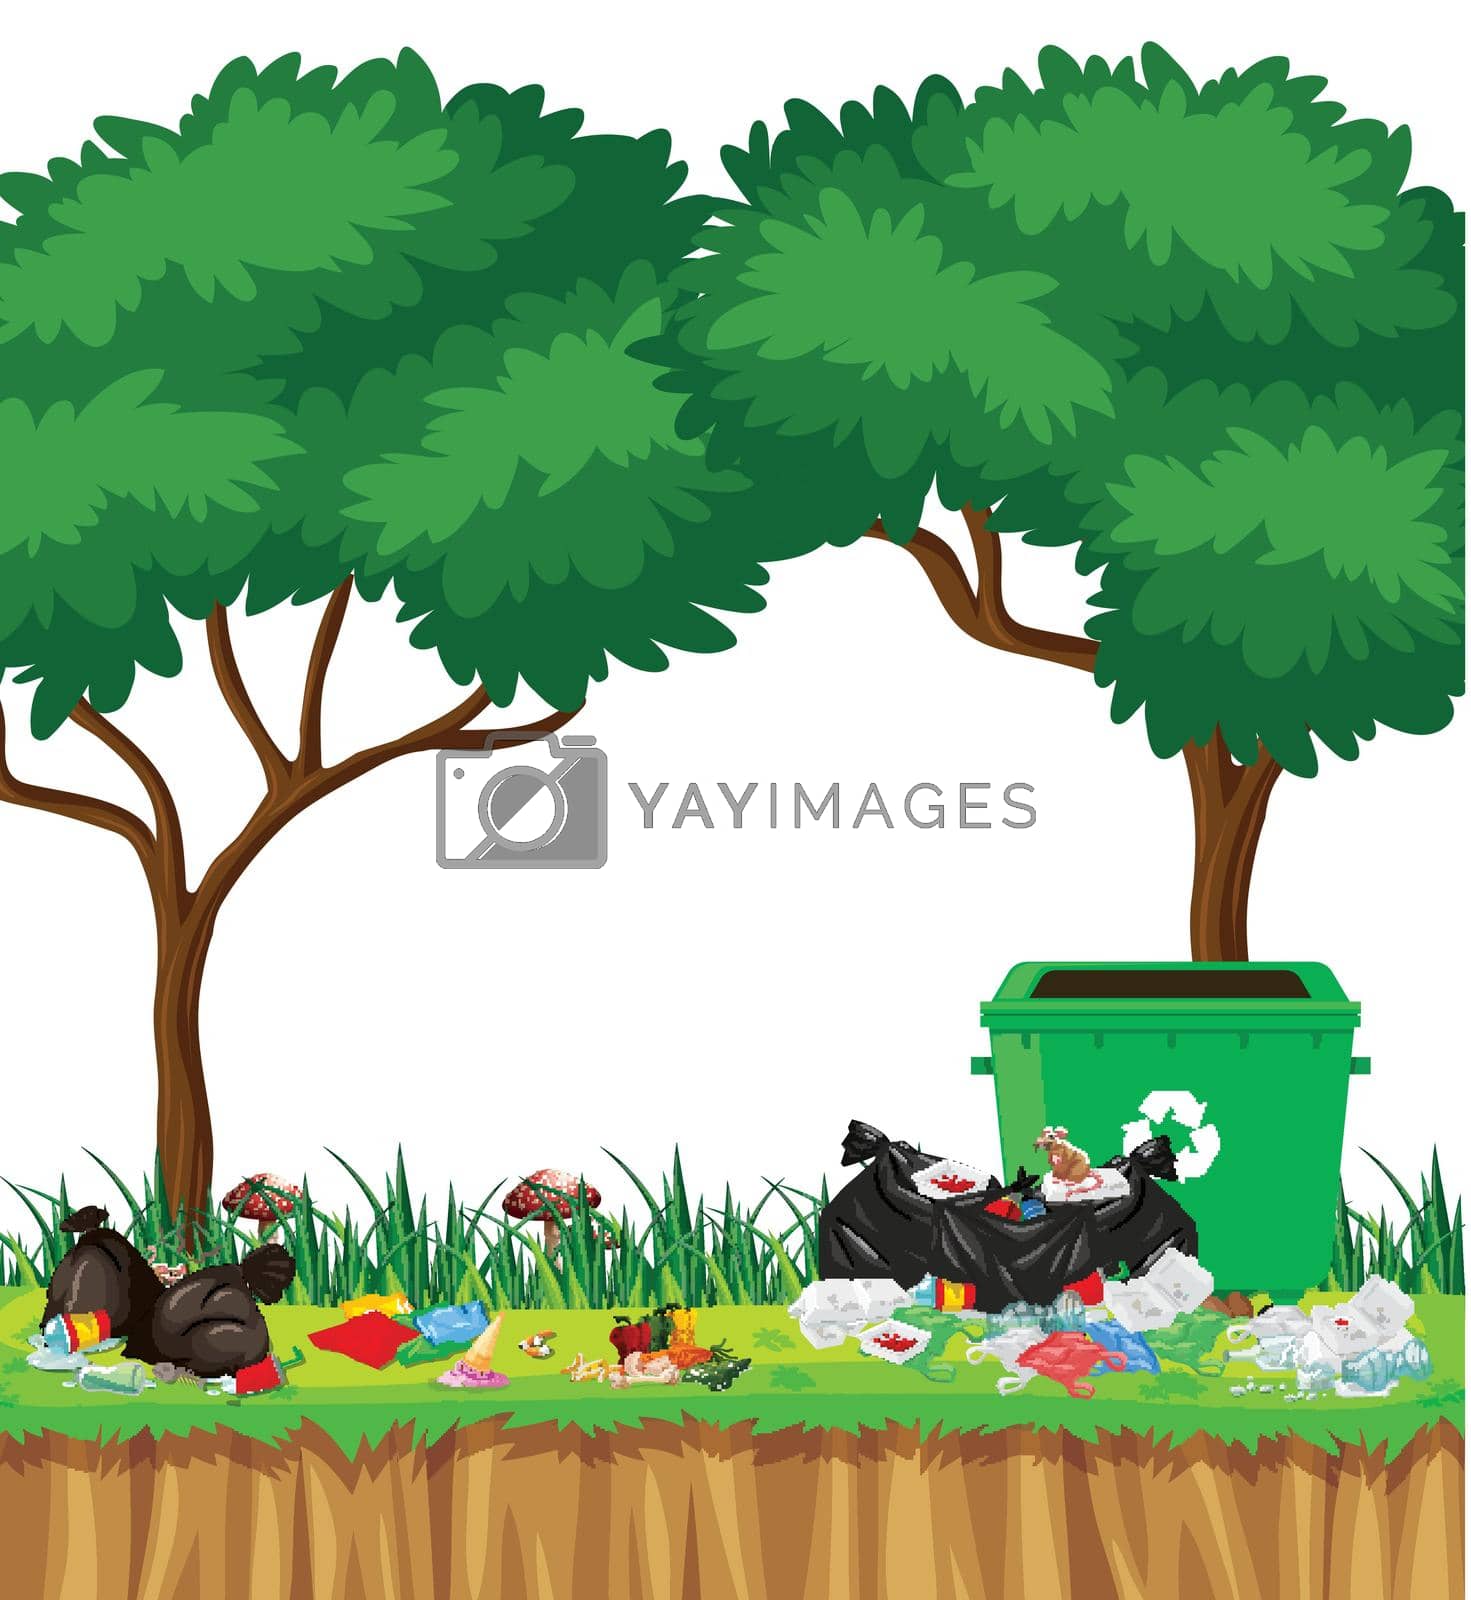 Royalty free image of Rubbish in park scene by iimages